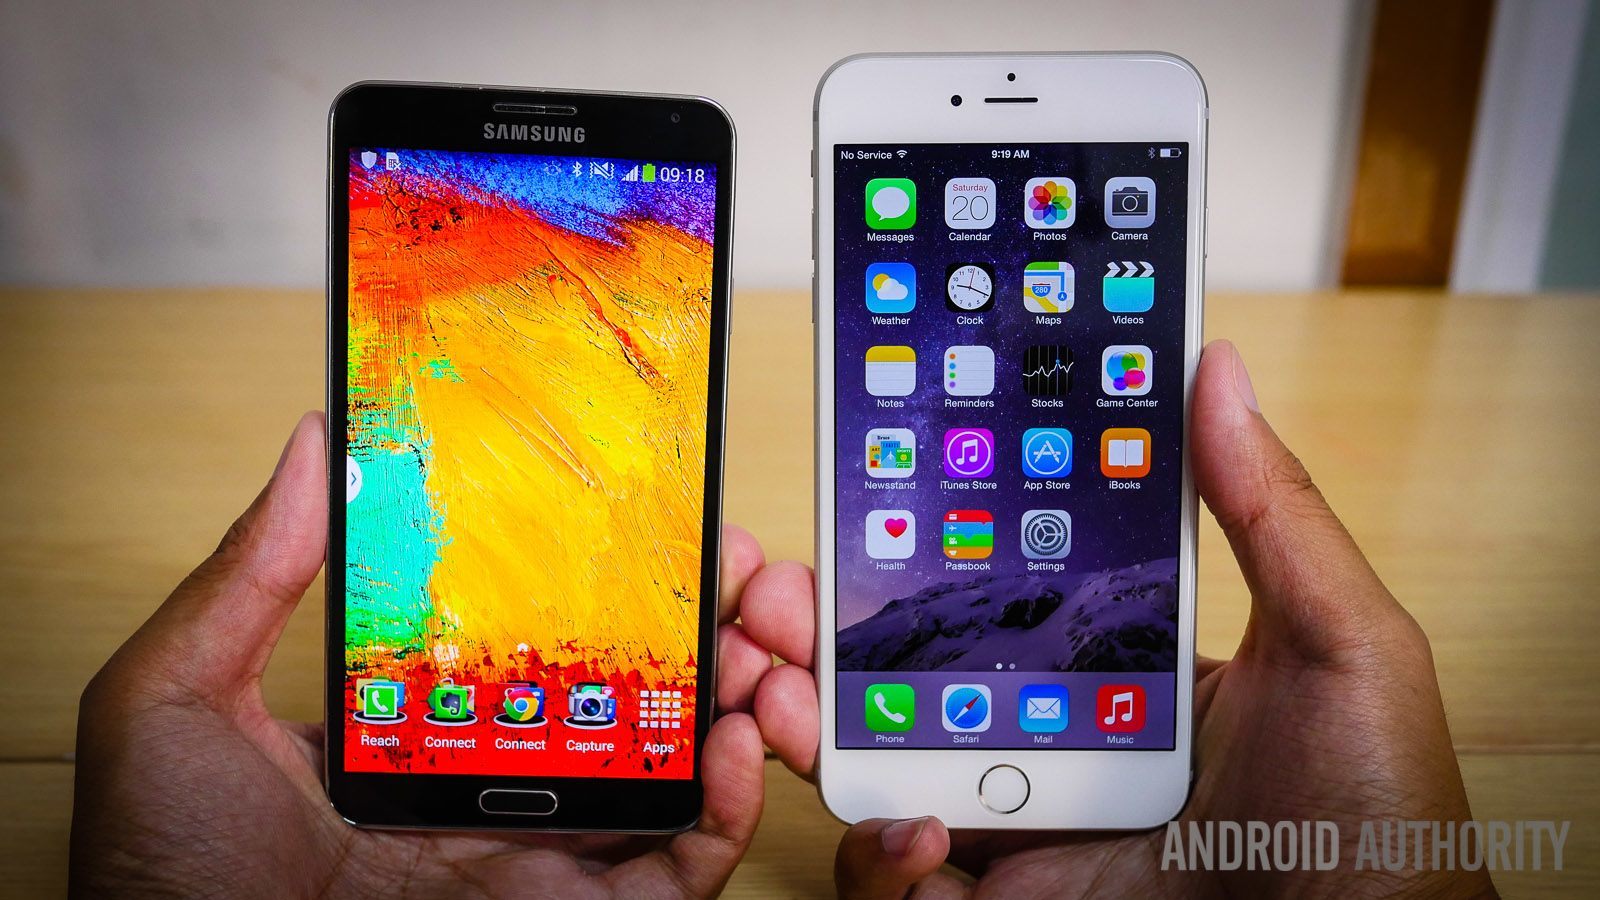 iphone 6 plus vs samsung galaxy note 3 quick look aa (12 of 20)